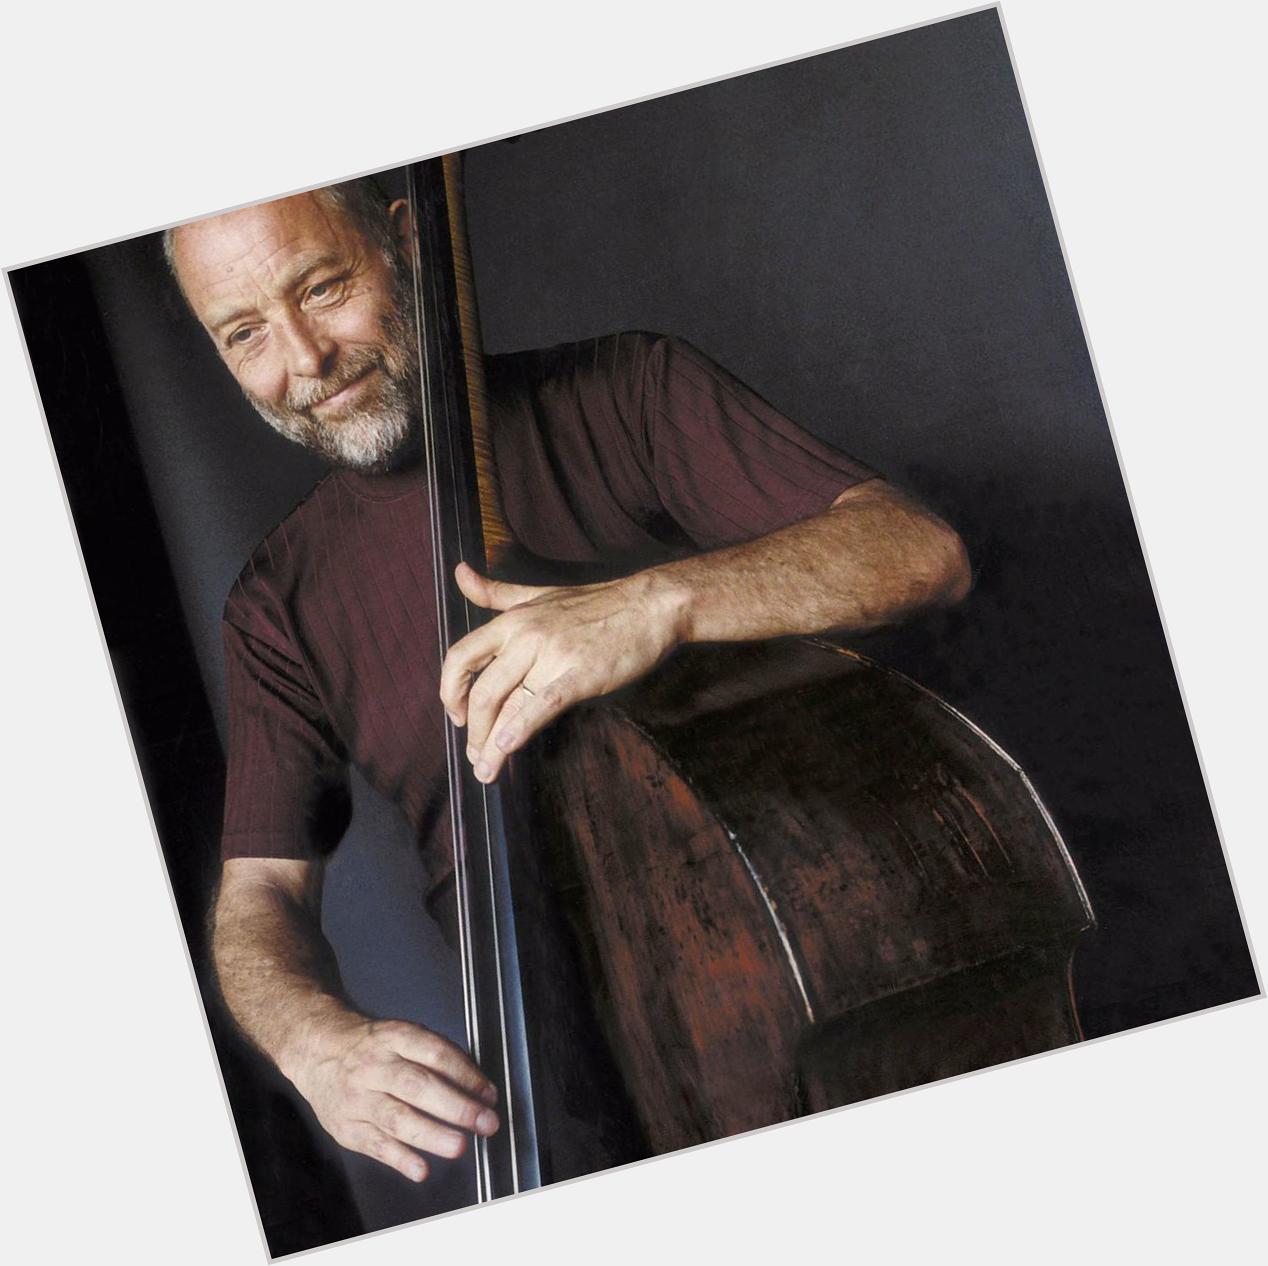 Happy Birthday to the great jazz bass player and composer Dave Holland 